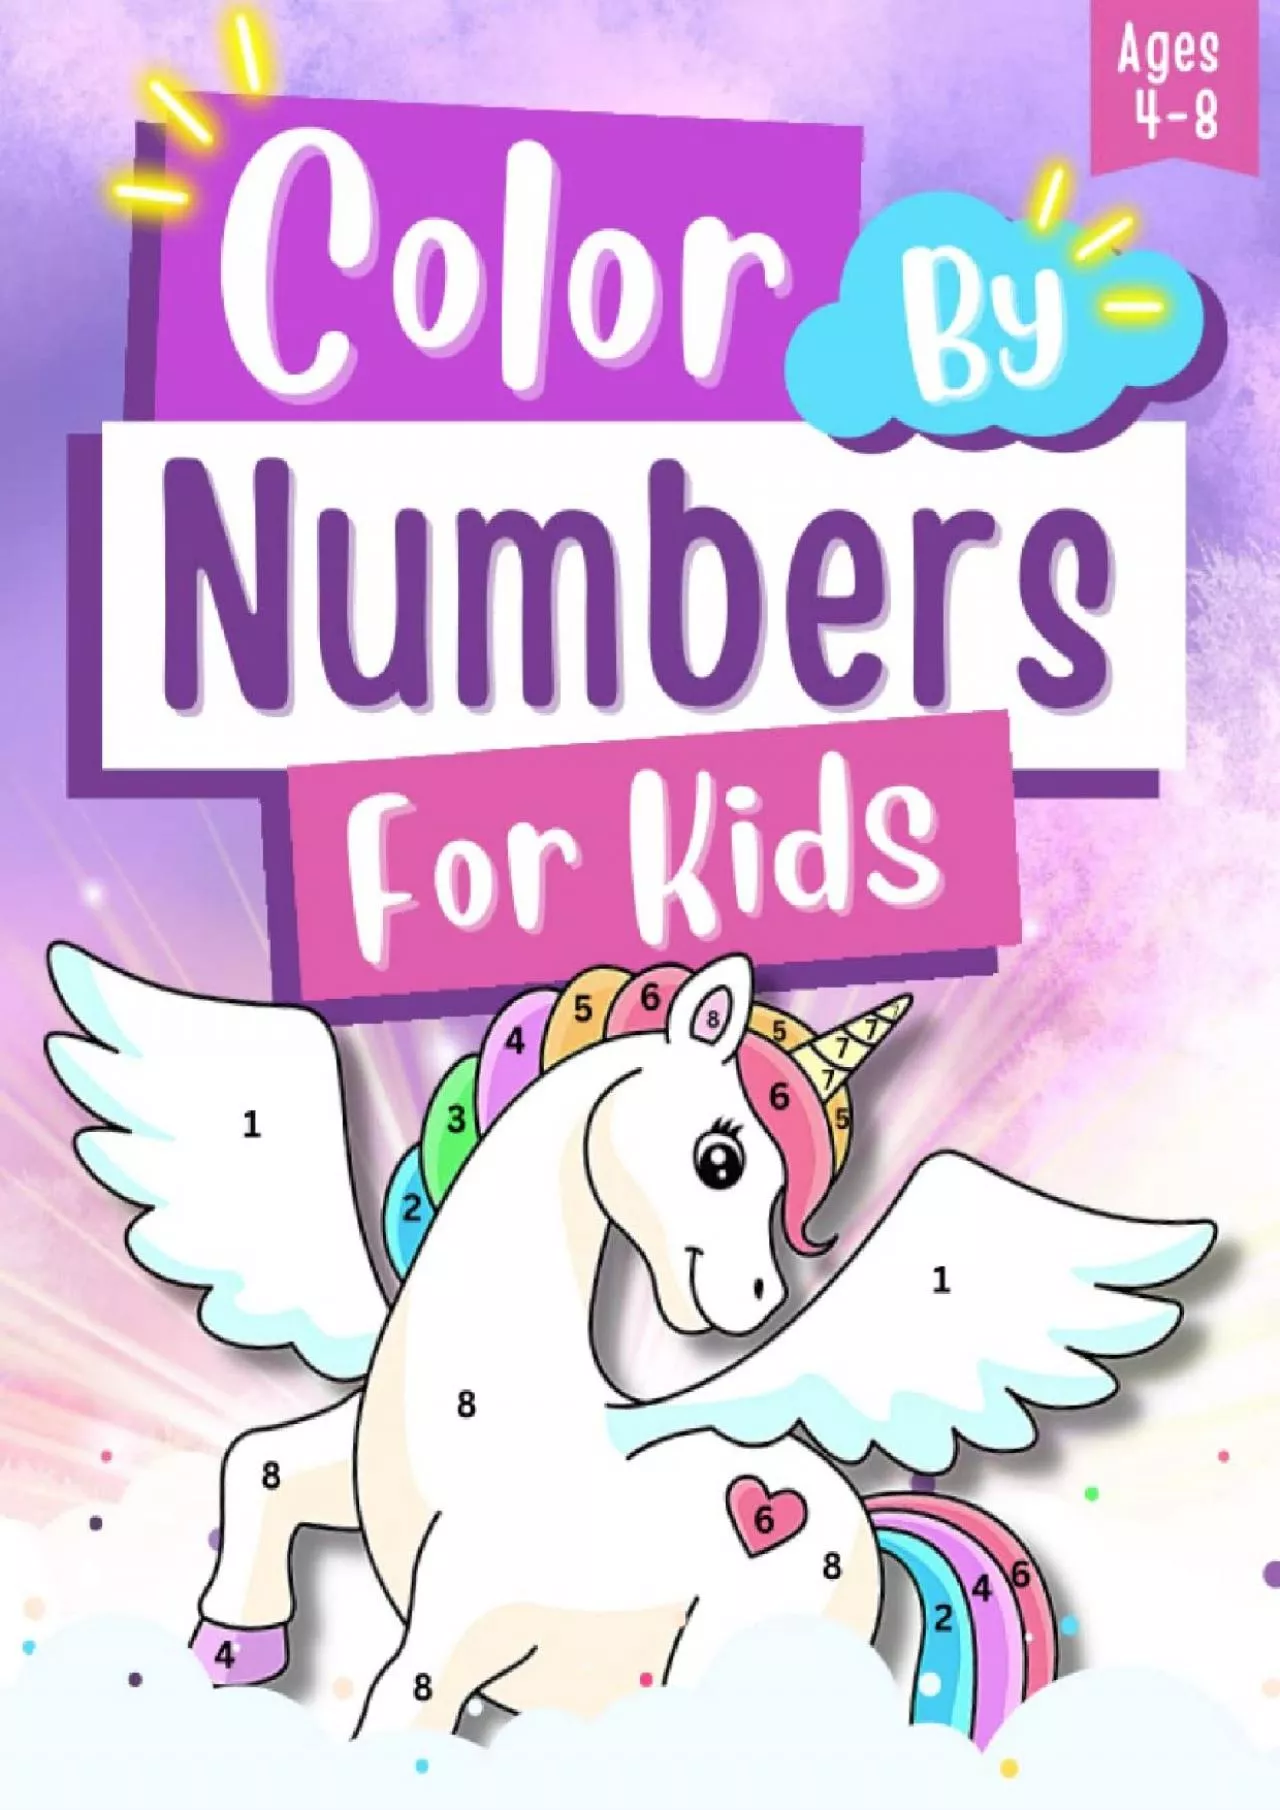 [READ] Color By Numbers For Kids Ages 4-8: Fun Coloring Book That Includes Number Tracing